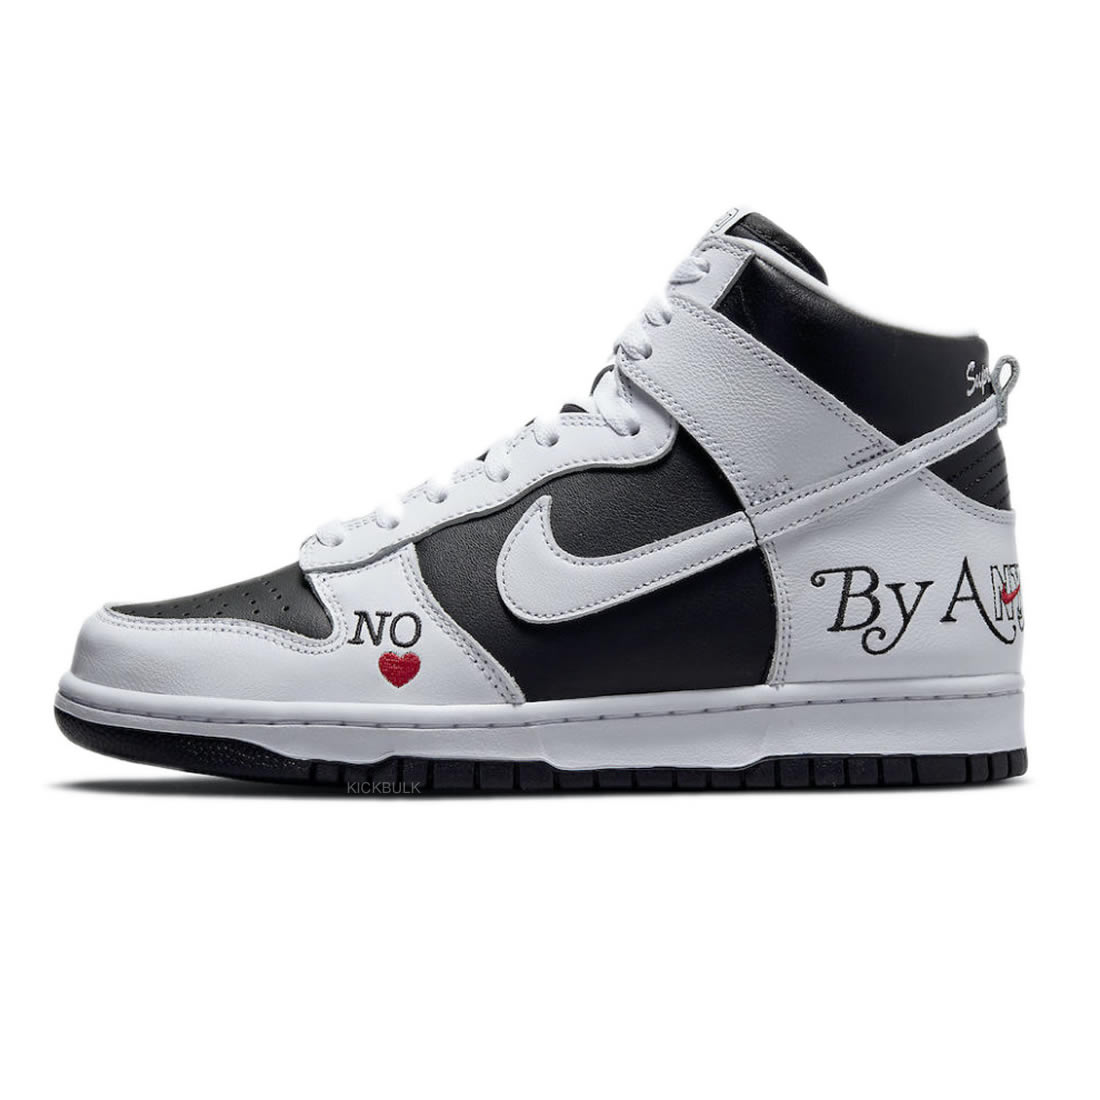 Supreme Nike Dunk High Sb By Any Means Stormtrooper Dn3741 002 1 - www.kickbulk.org